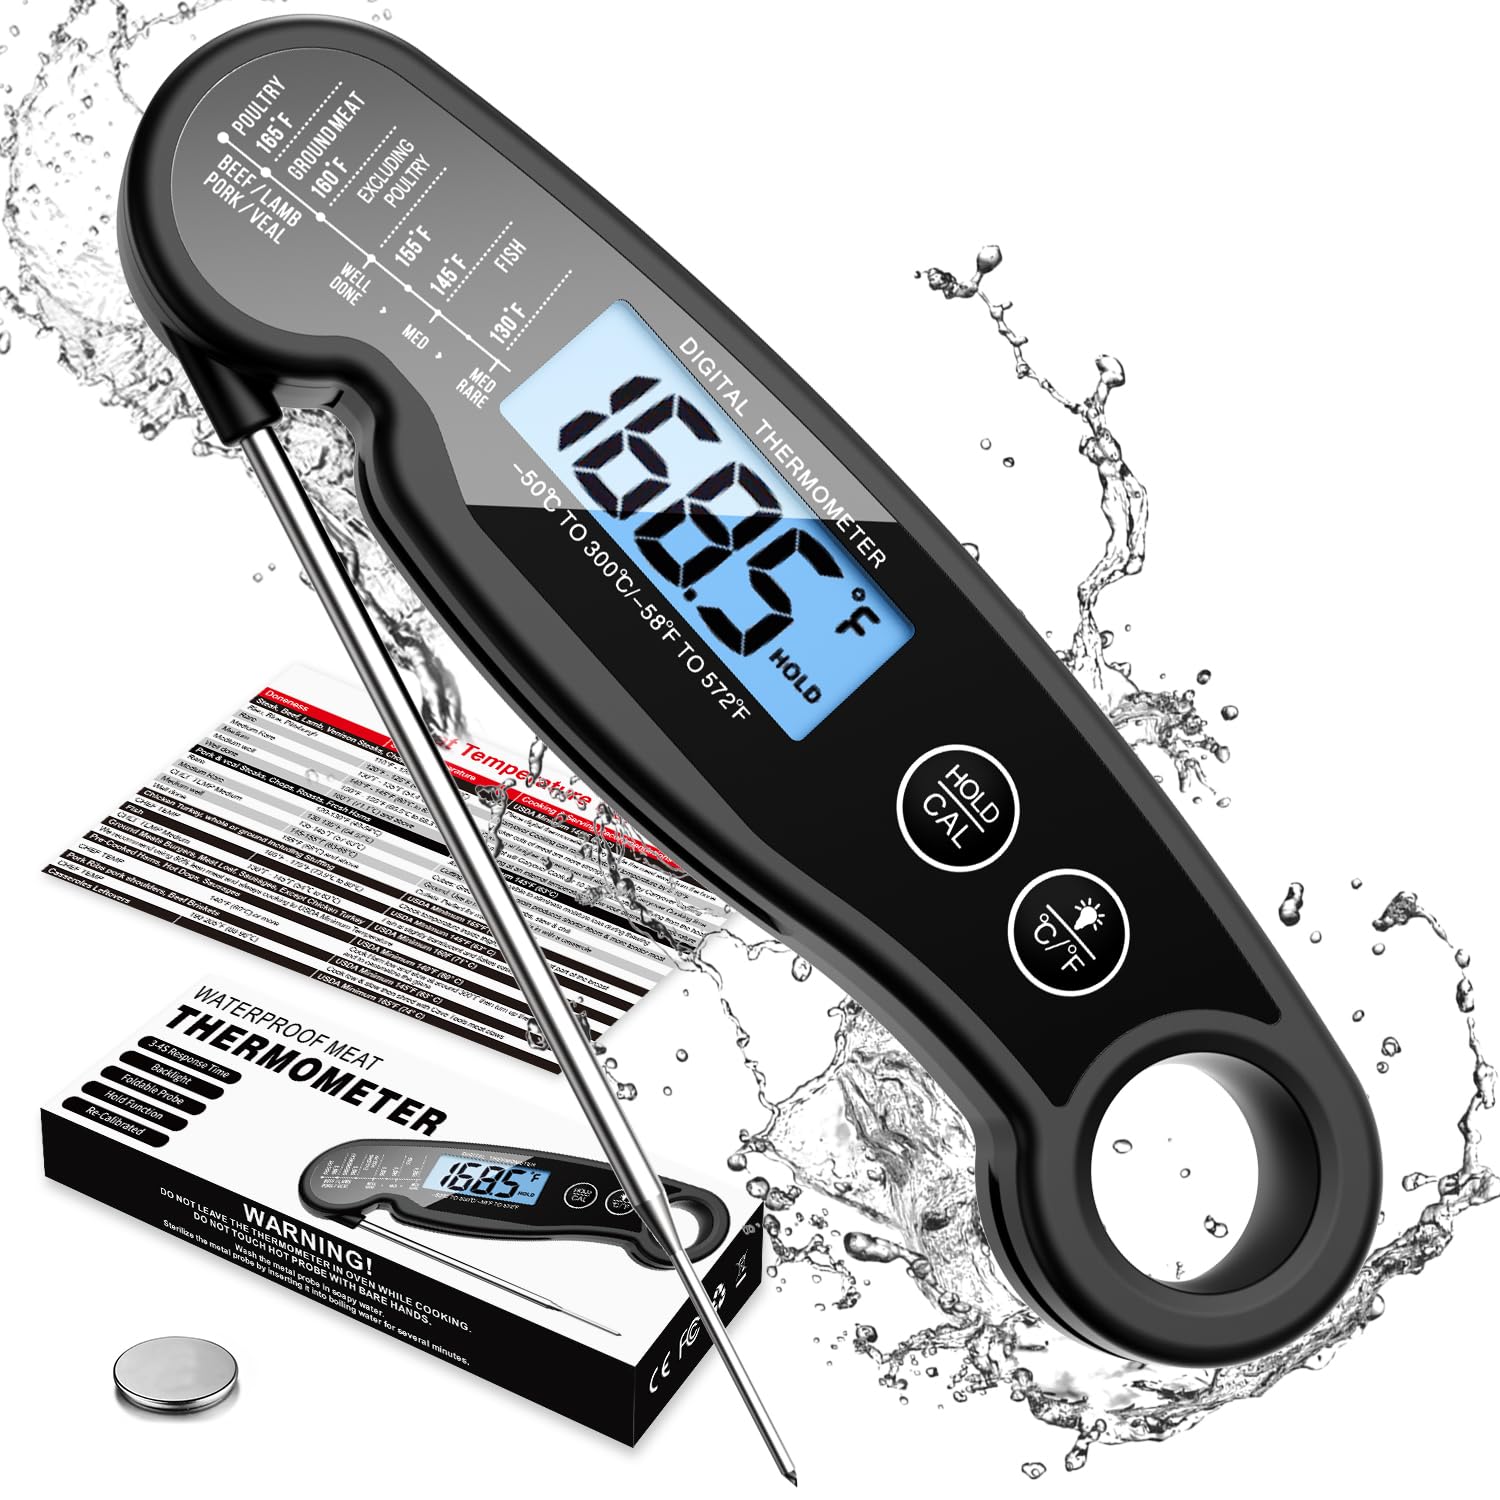 Dropship Digital Meat Thermometer With Probe - Waterproof; Kitchen Instant  Read Food Thermometer For Cooking; Baking; Liquids; Candy; Grilling BBQ &  Air Fryer to Sell Online at a Lower Price